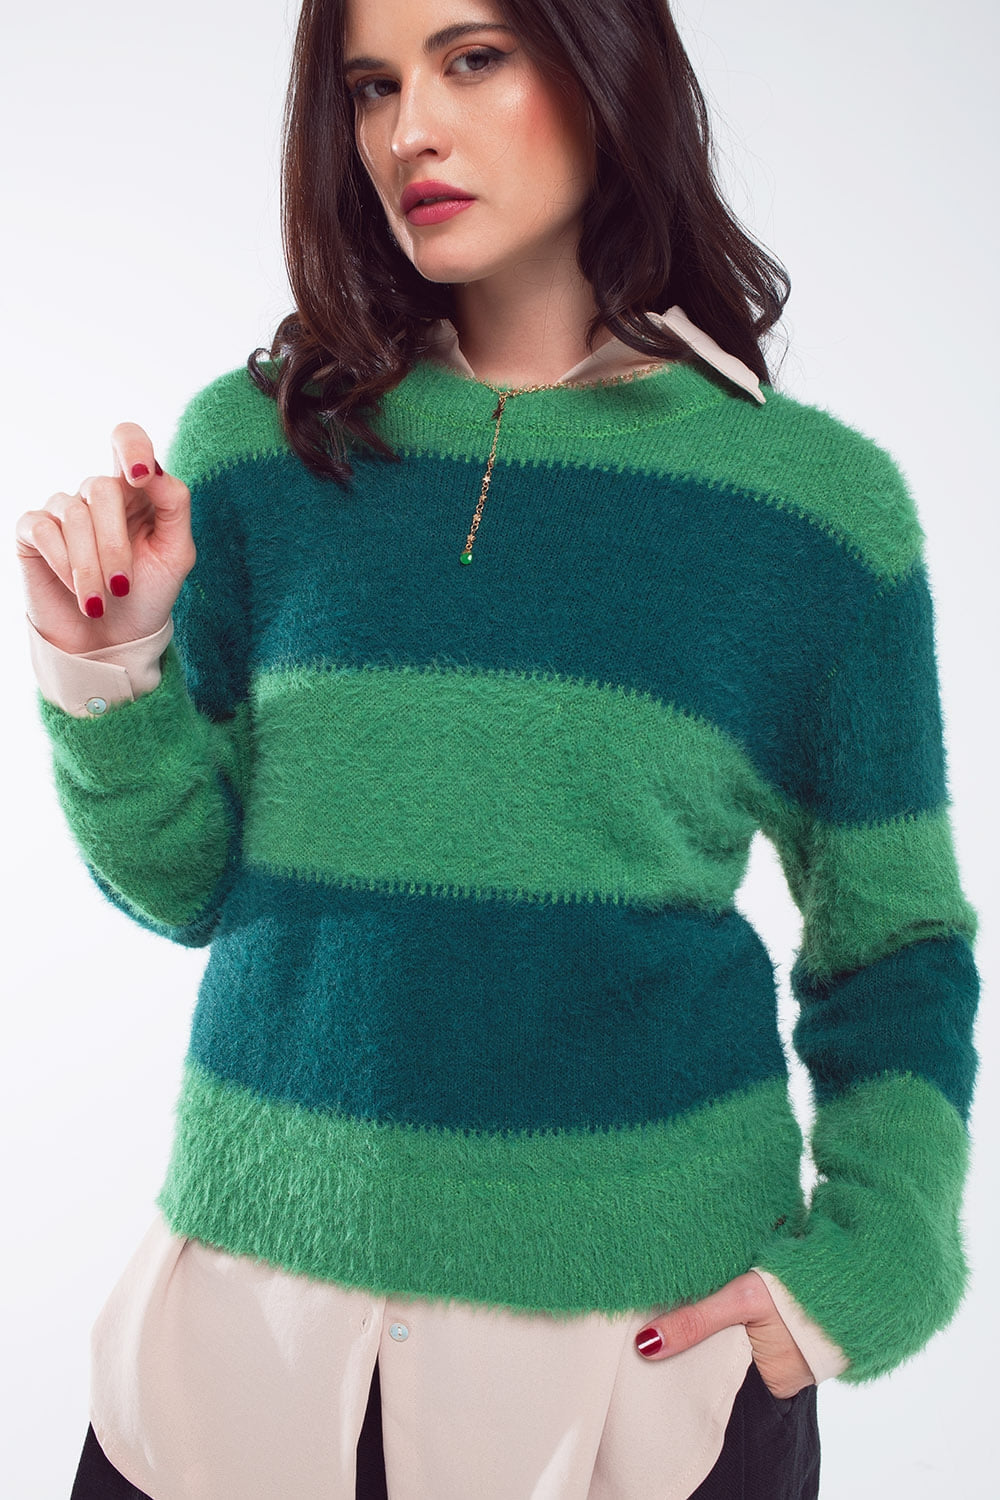 Q2 Green sweater with stripes and a crew neck